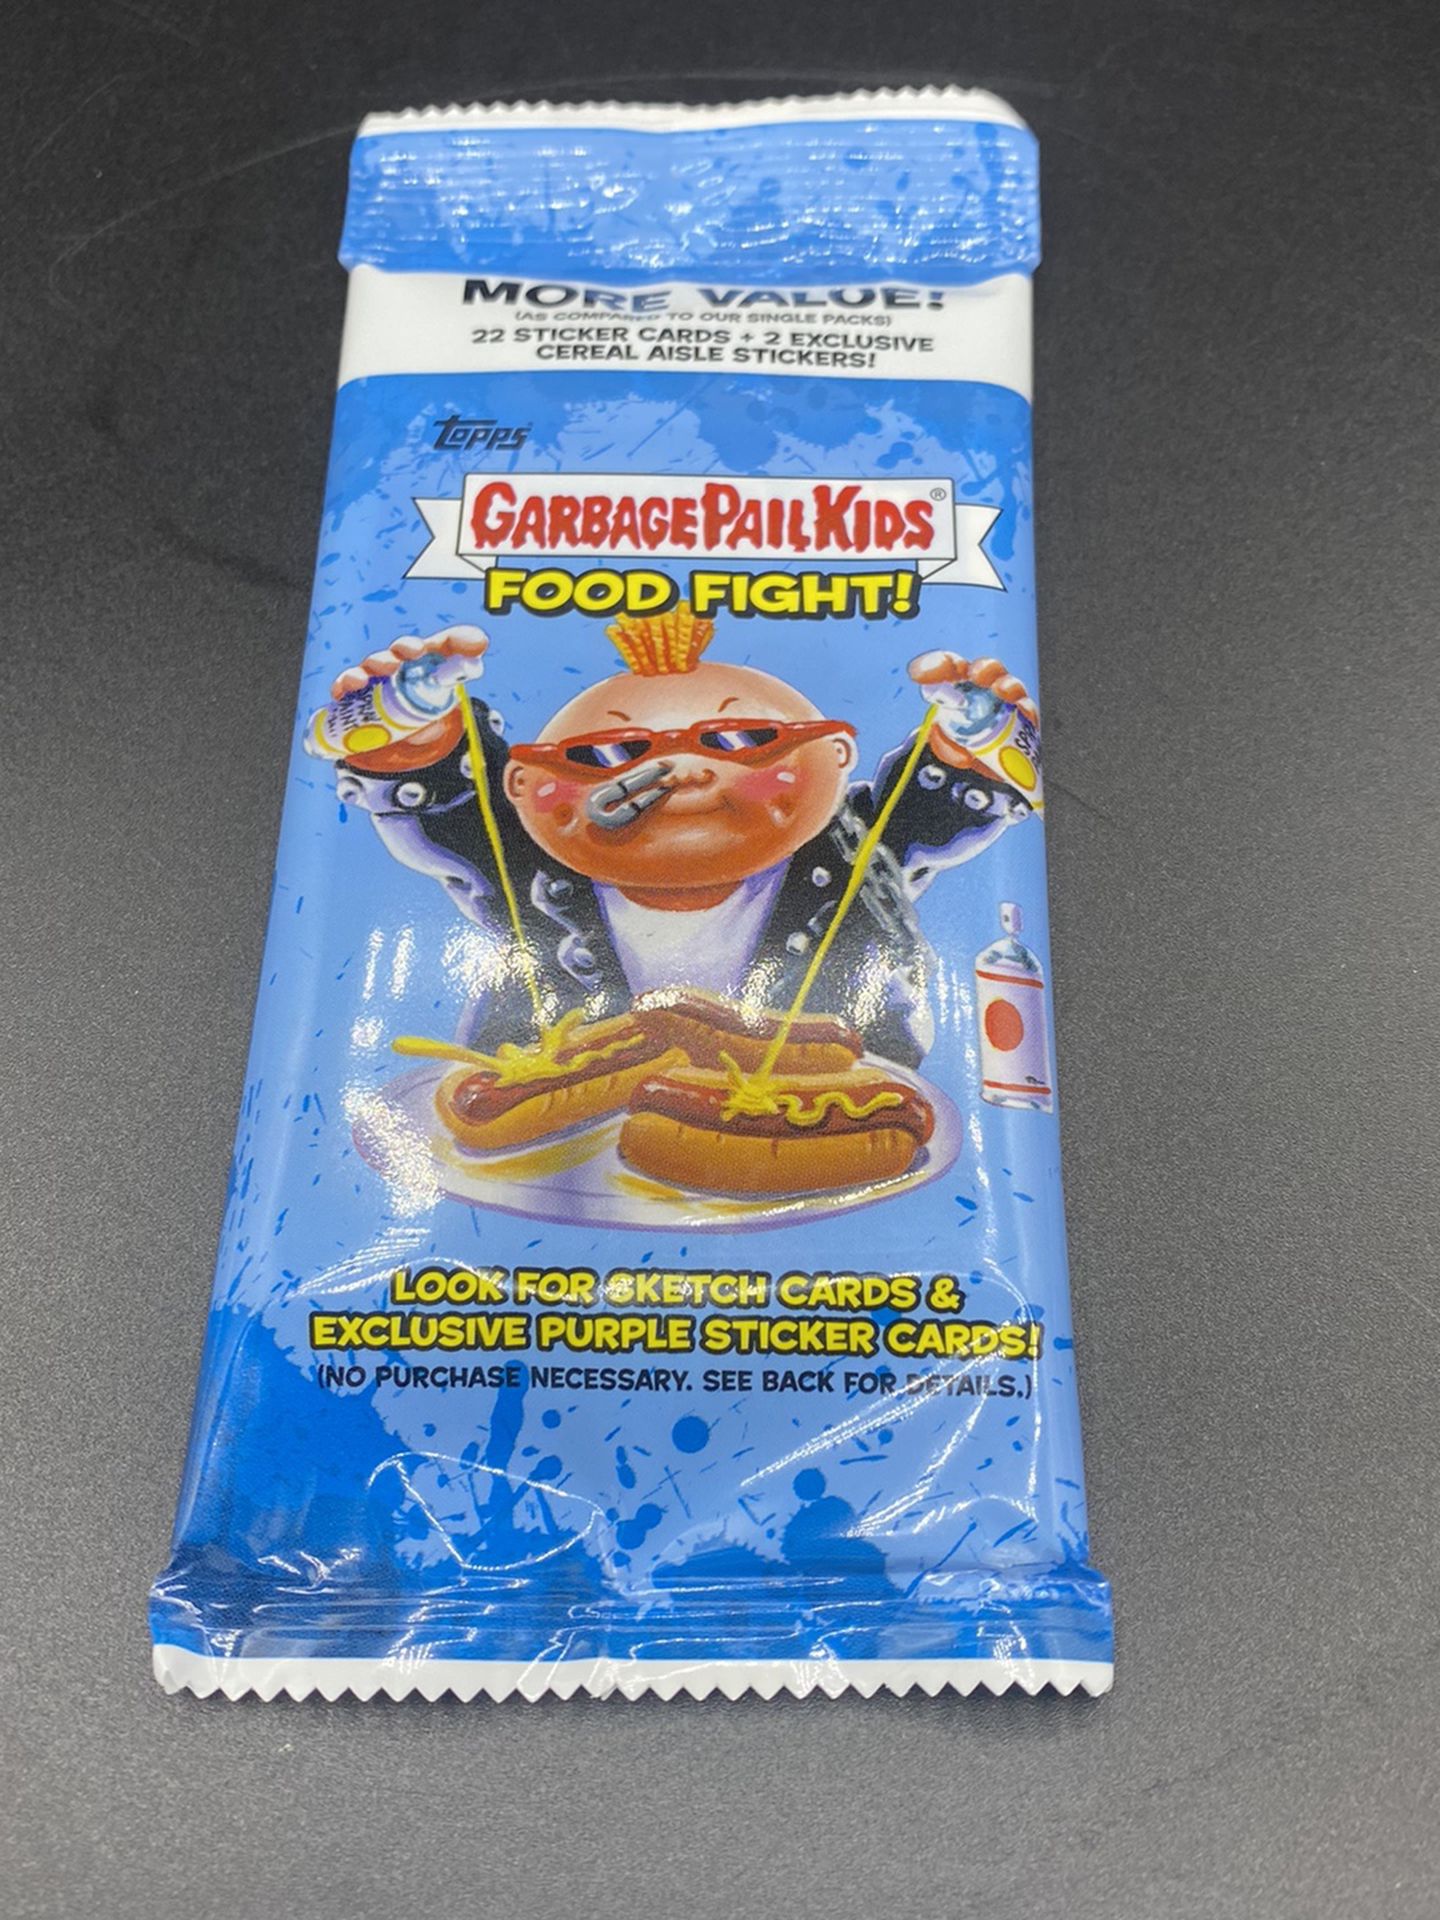 2021 Topps Garbage Pail Kids Food Fight! 22 Card Pack Exclusive Pack